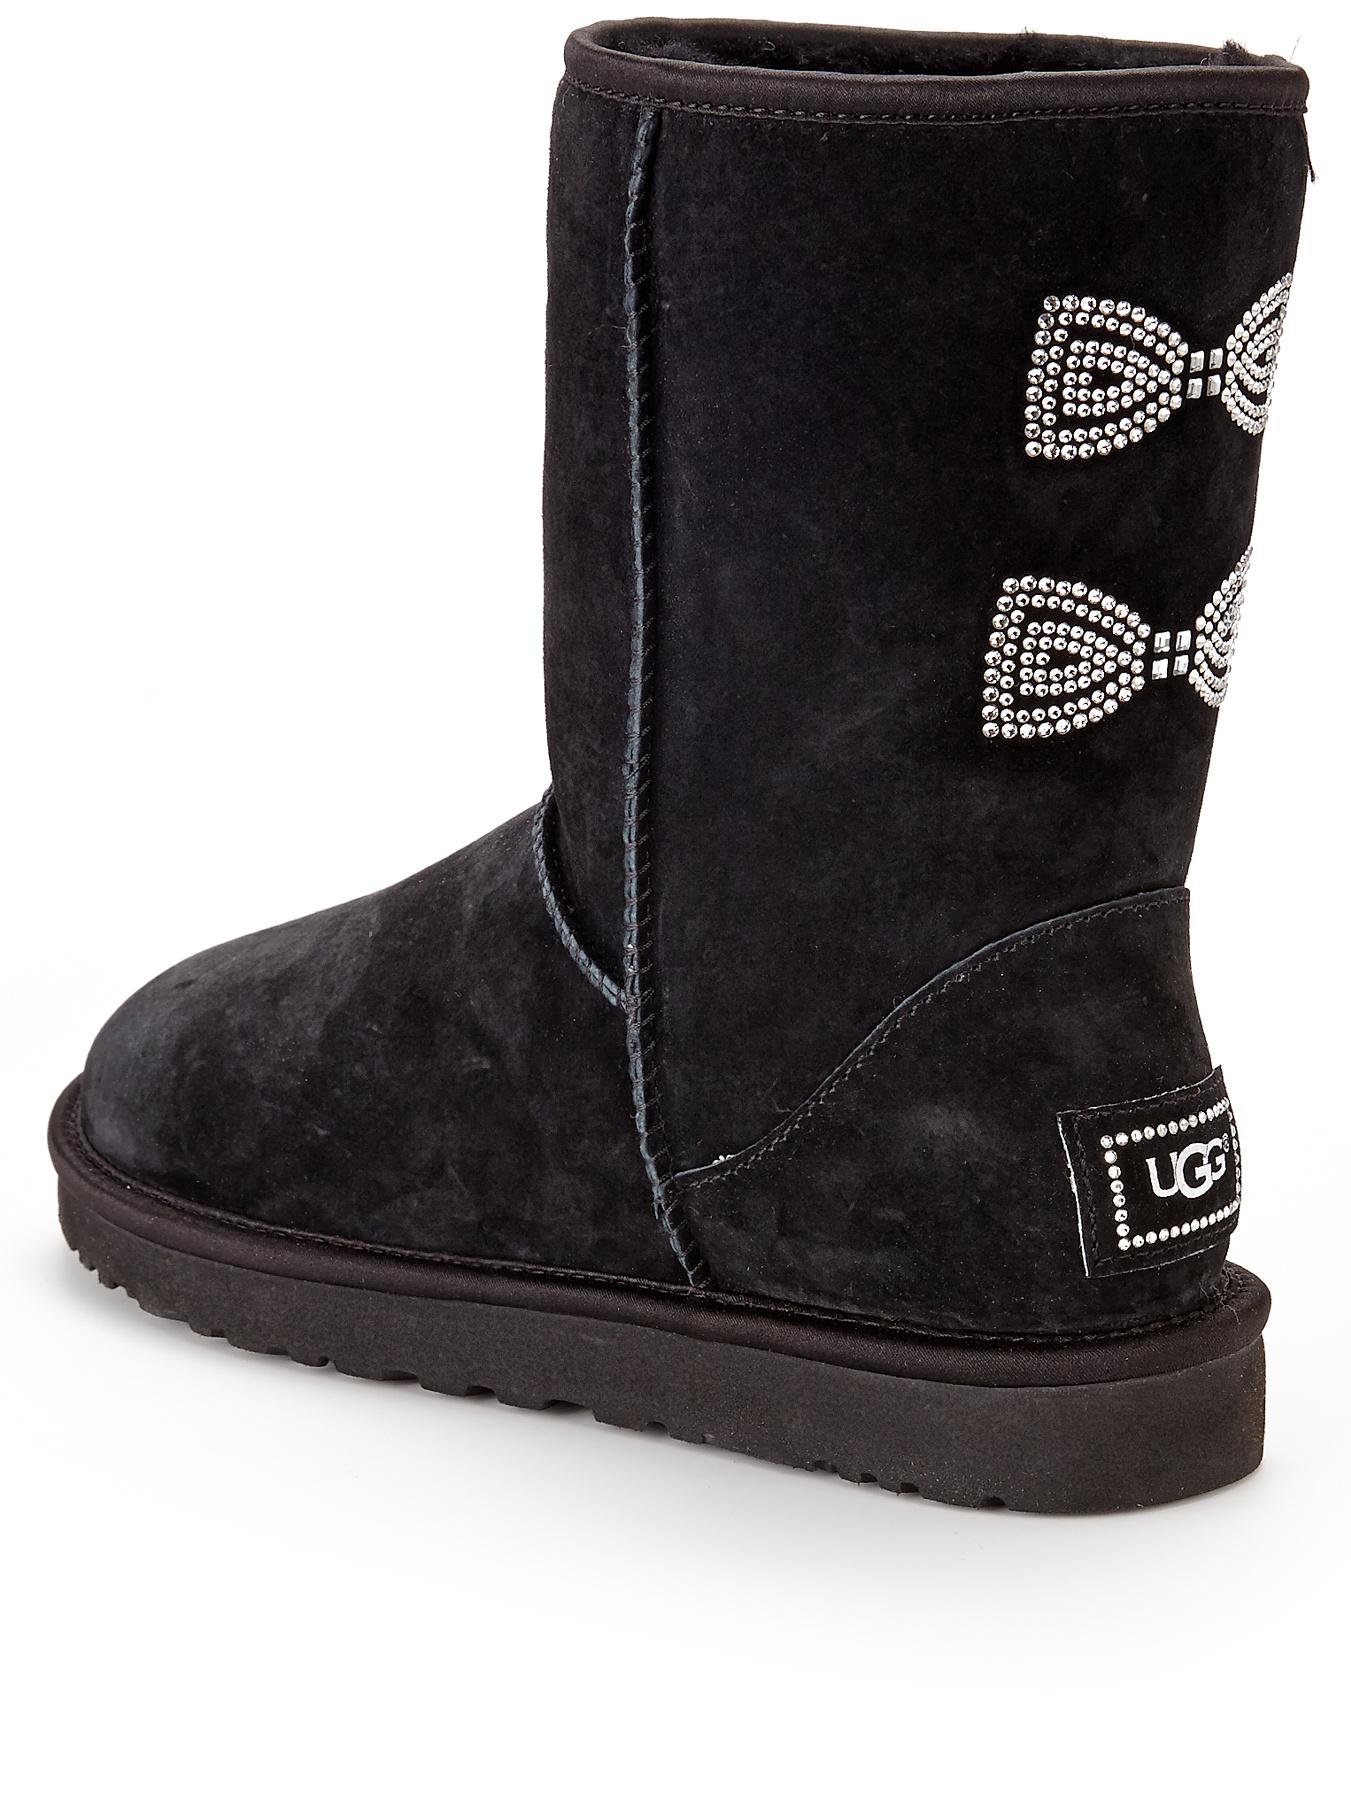 ugg boots with diamond bows